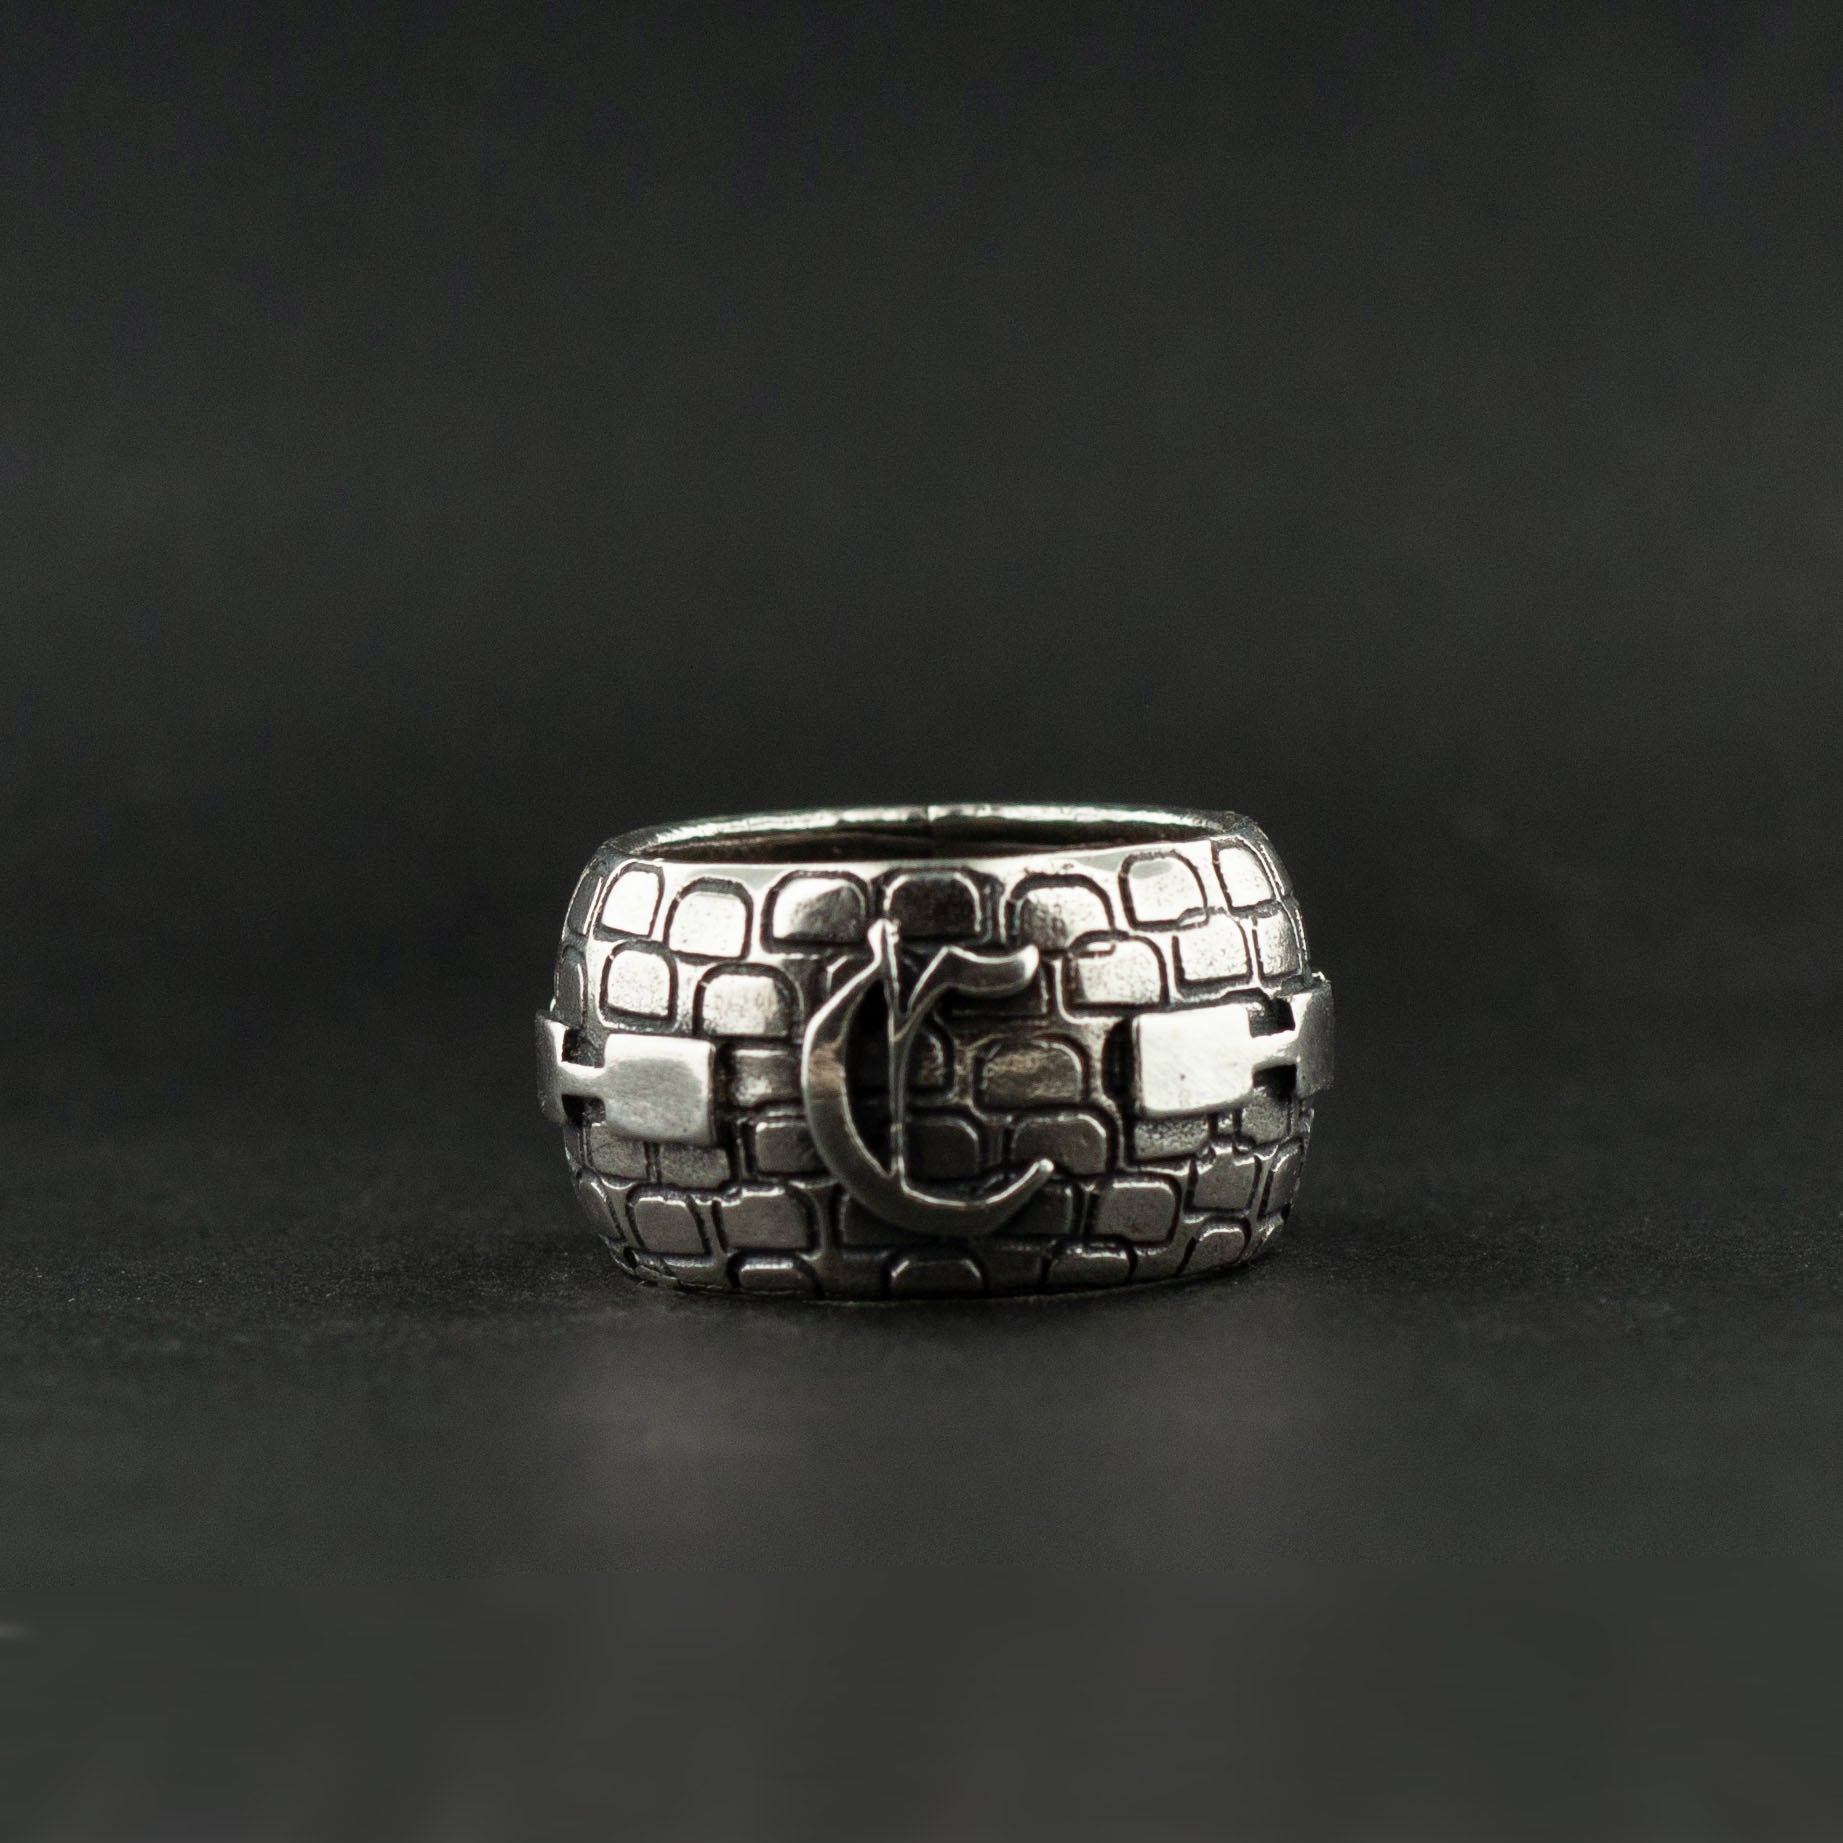 The Carstairs Family Ring